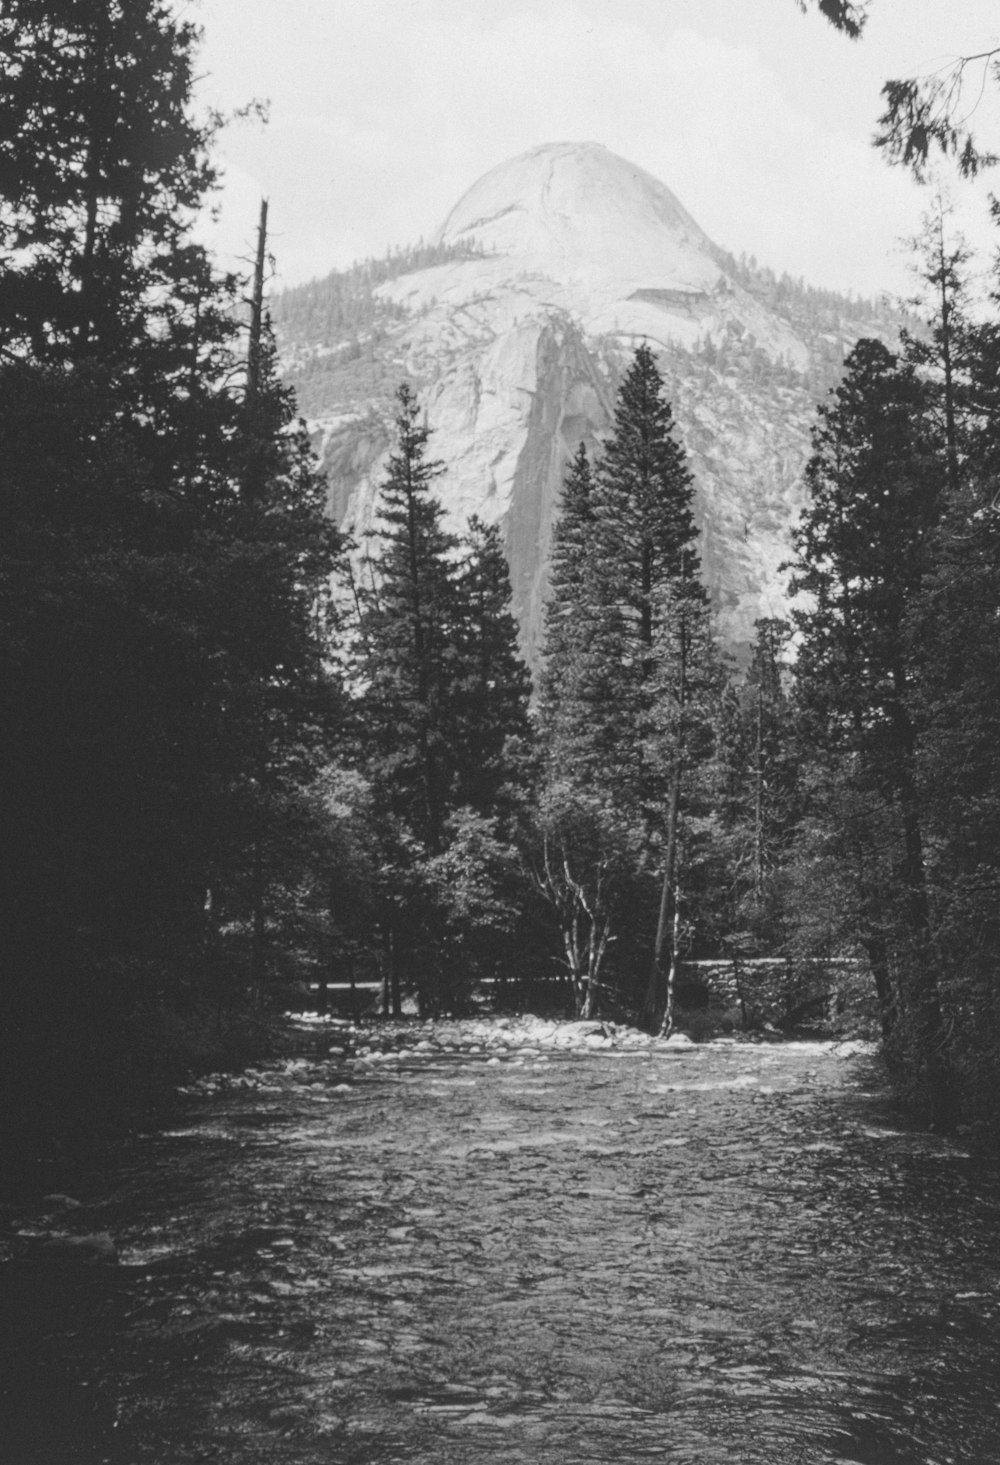 a black and white photo of a mountain and a river